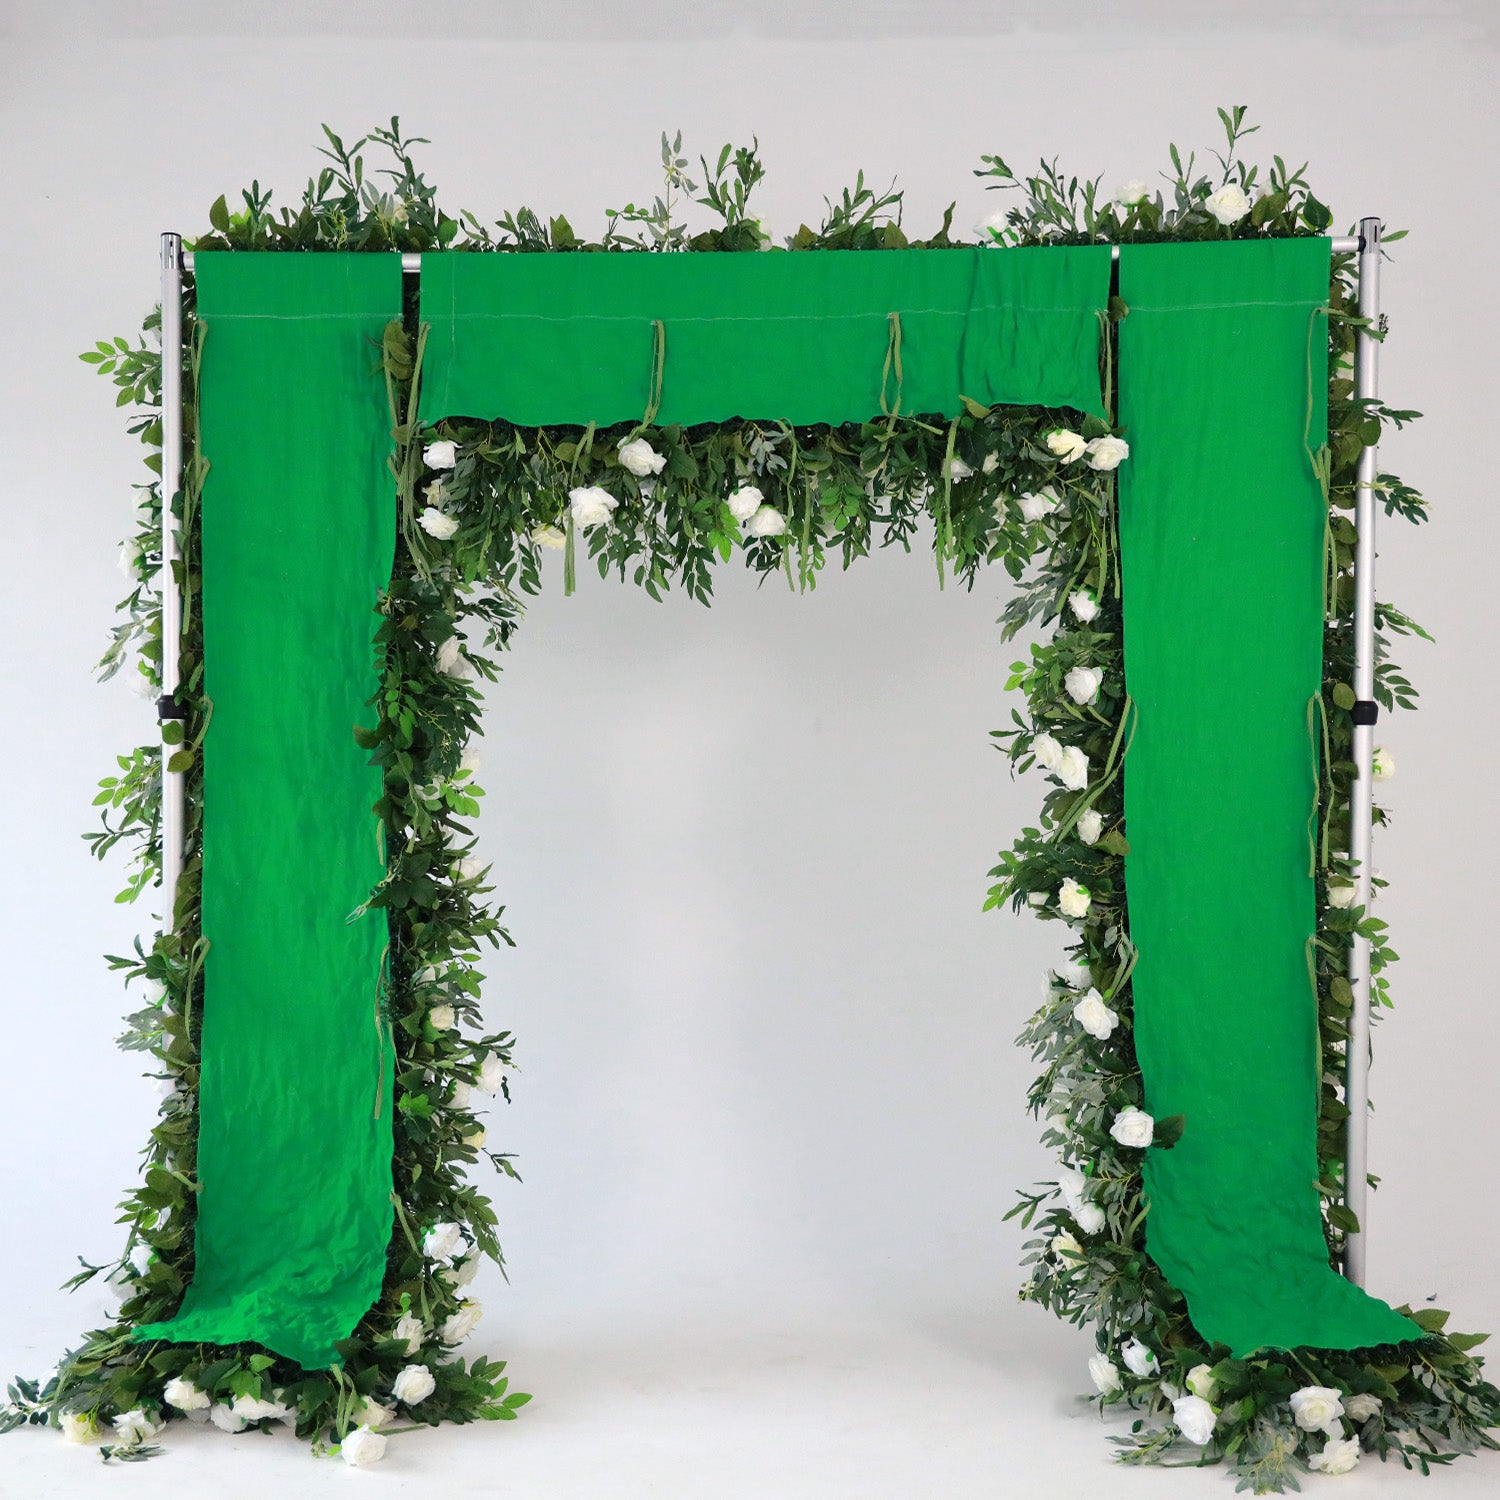 Green and white fabric artificial flower wall is easy to install.